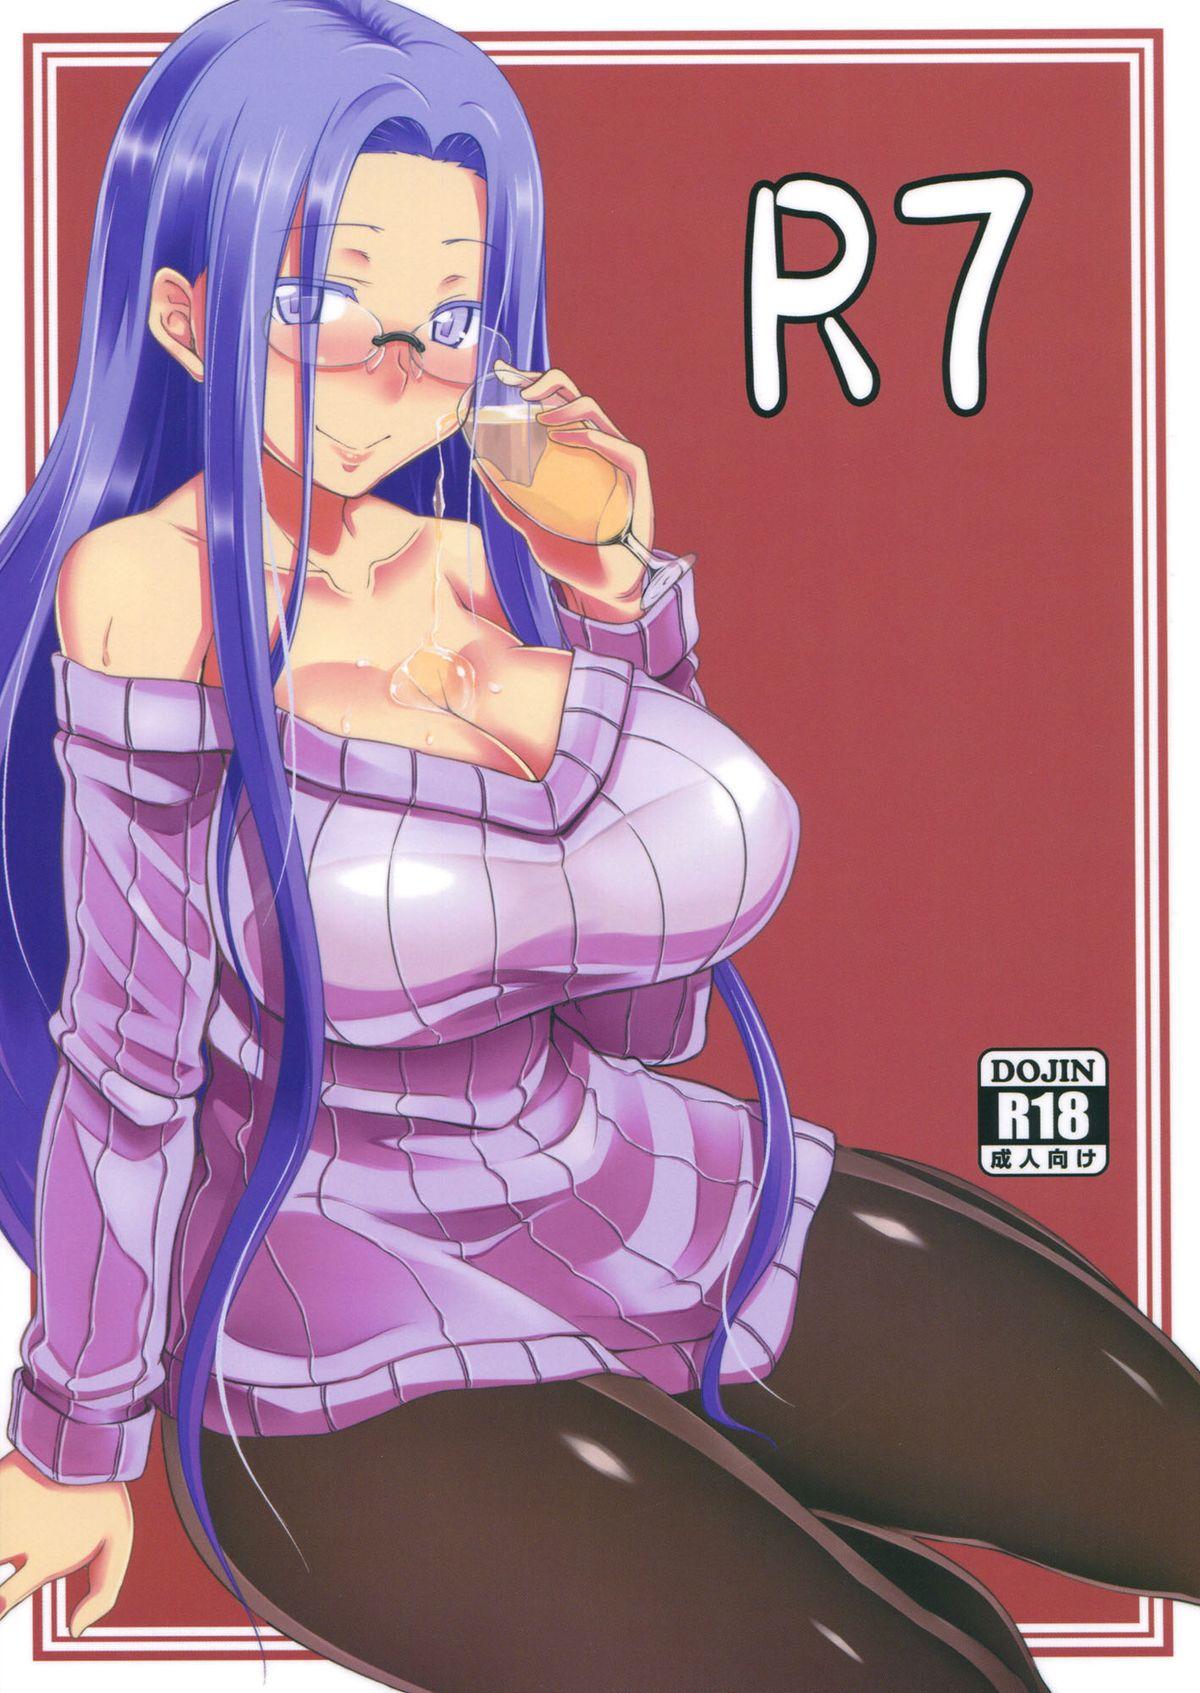 Daring R7 - Fate stay night Fate hollow ataraxia Jerk Off - Page 1